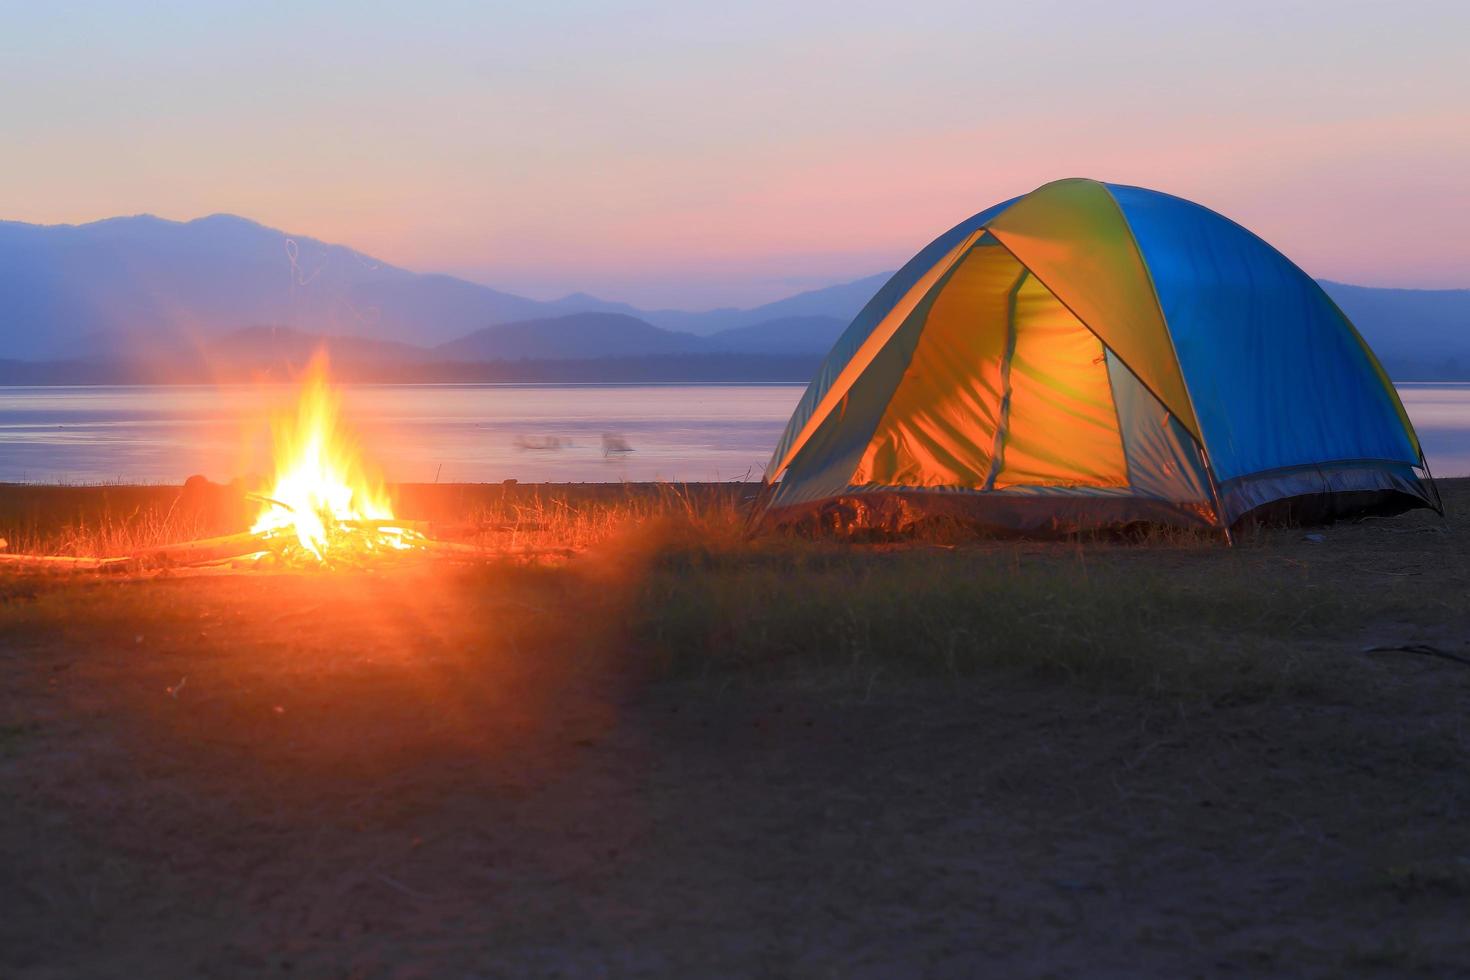 tent and campfire at sunset,beside the lake photo